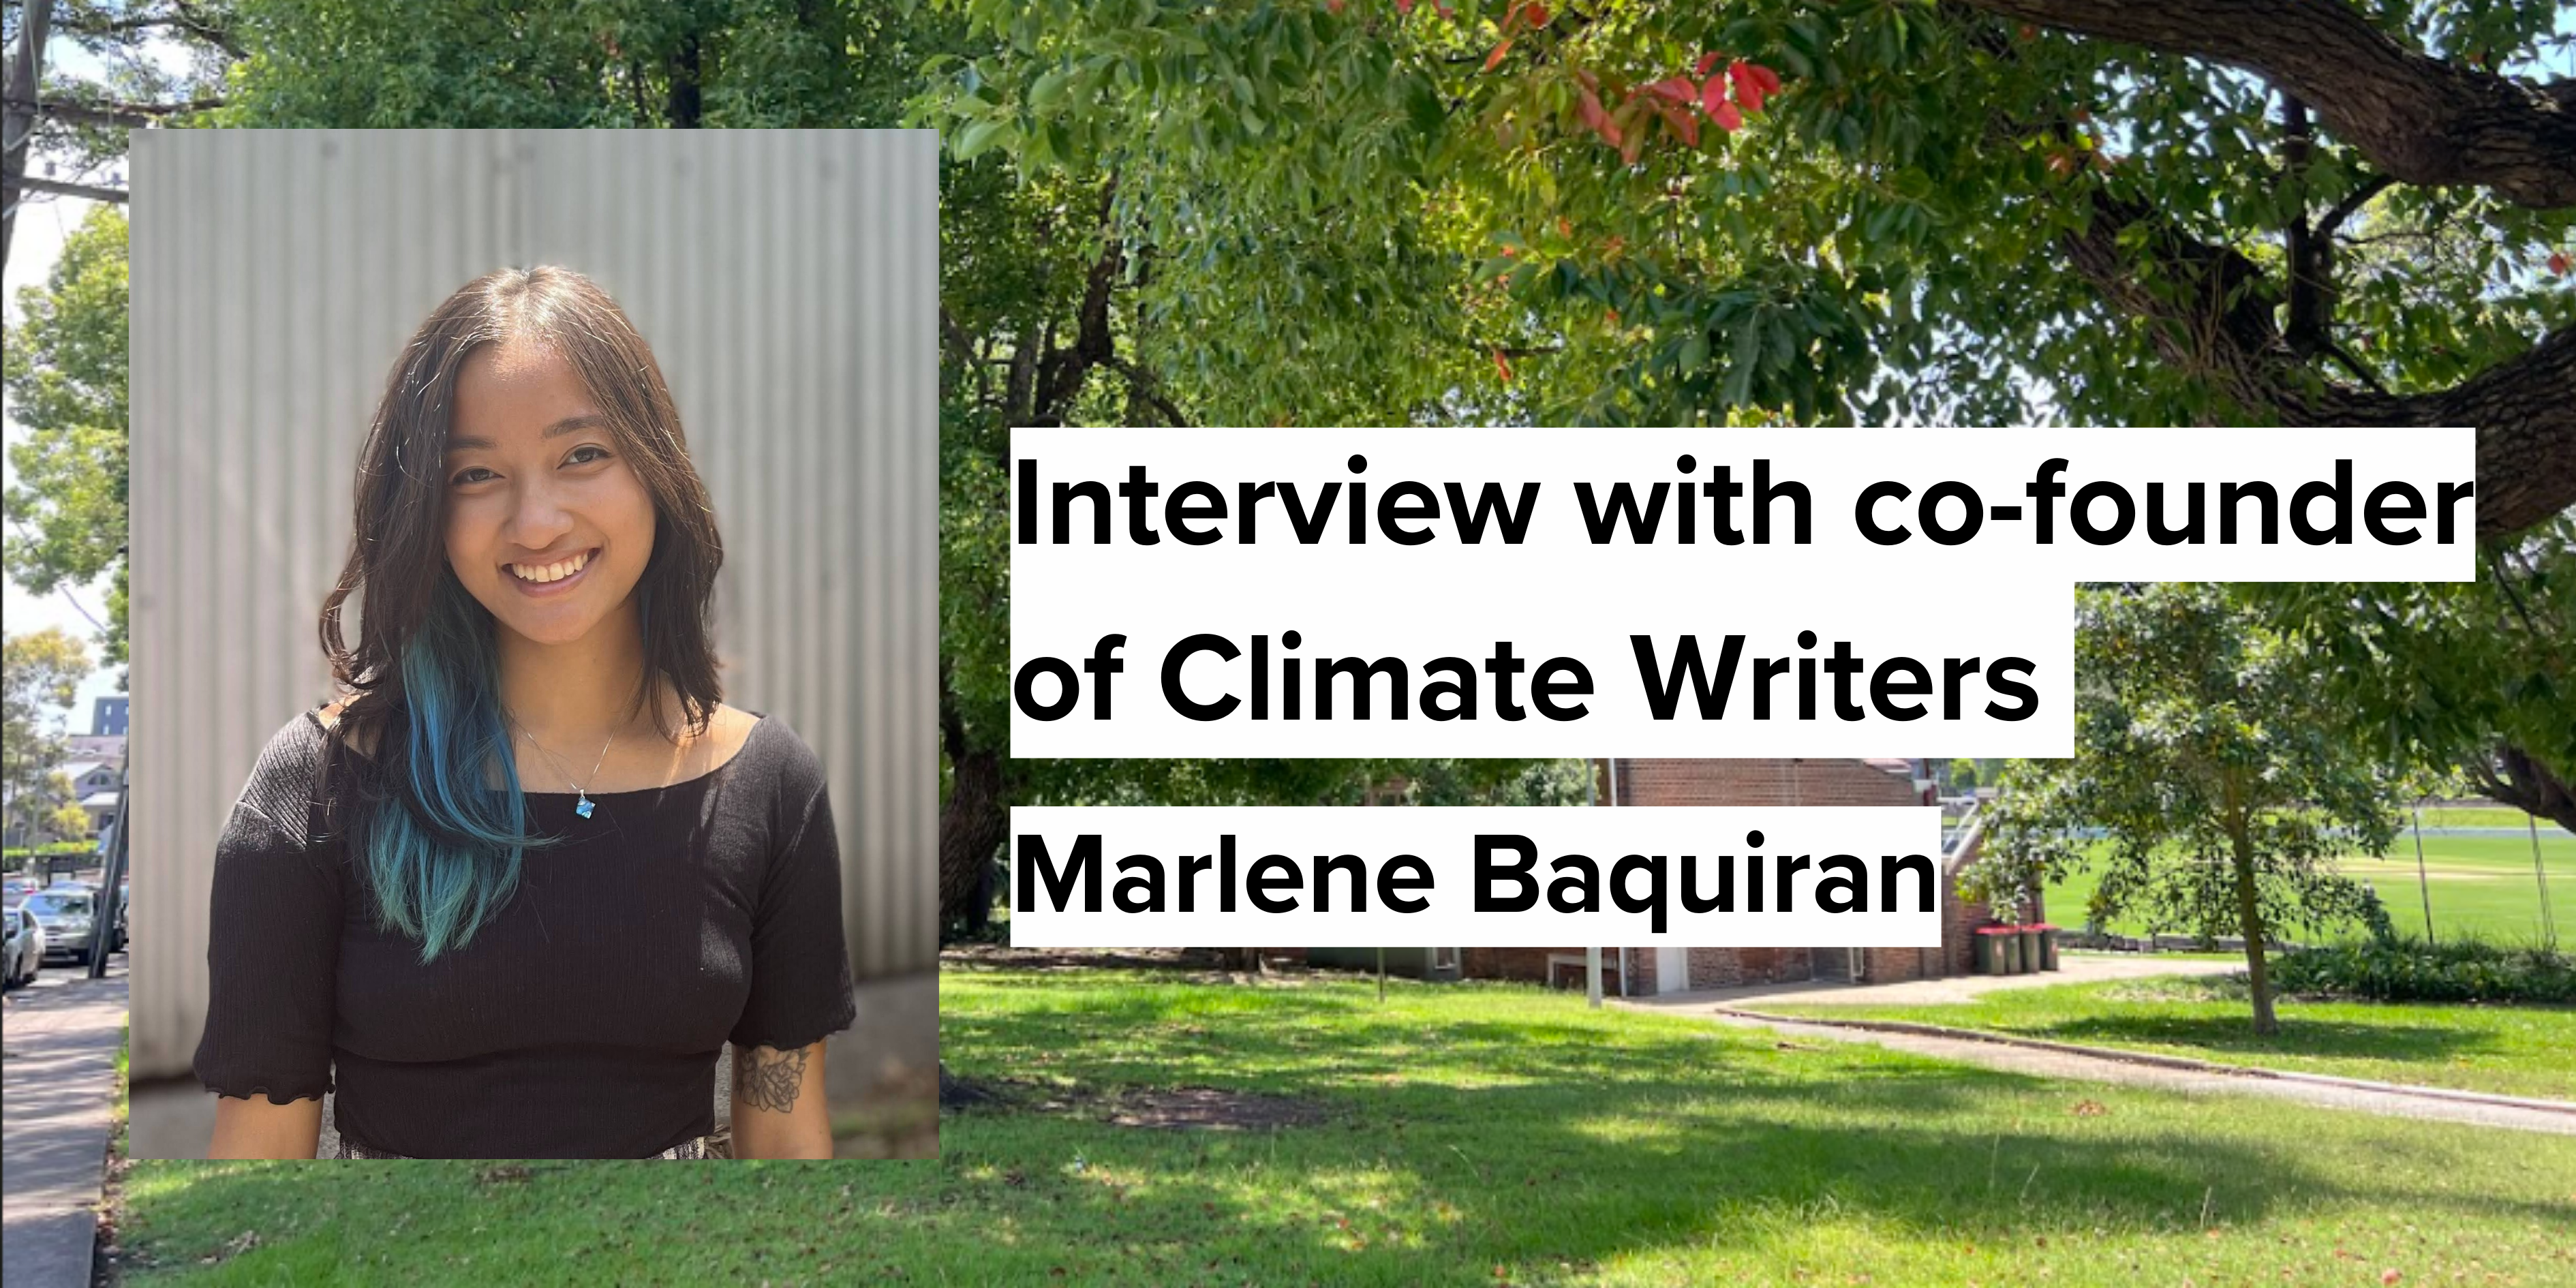 Making climate action “as easy and accessible as possible”: Interview with Marlene Baquiran, co-founder of Climate Writers